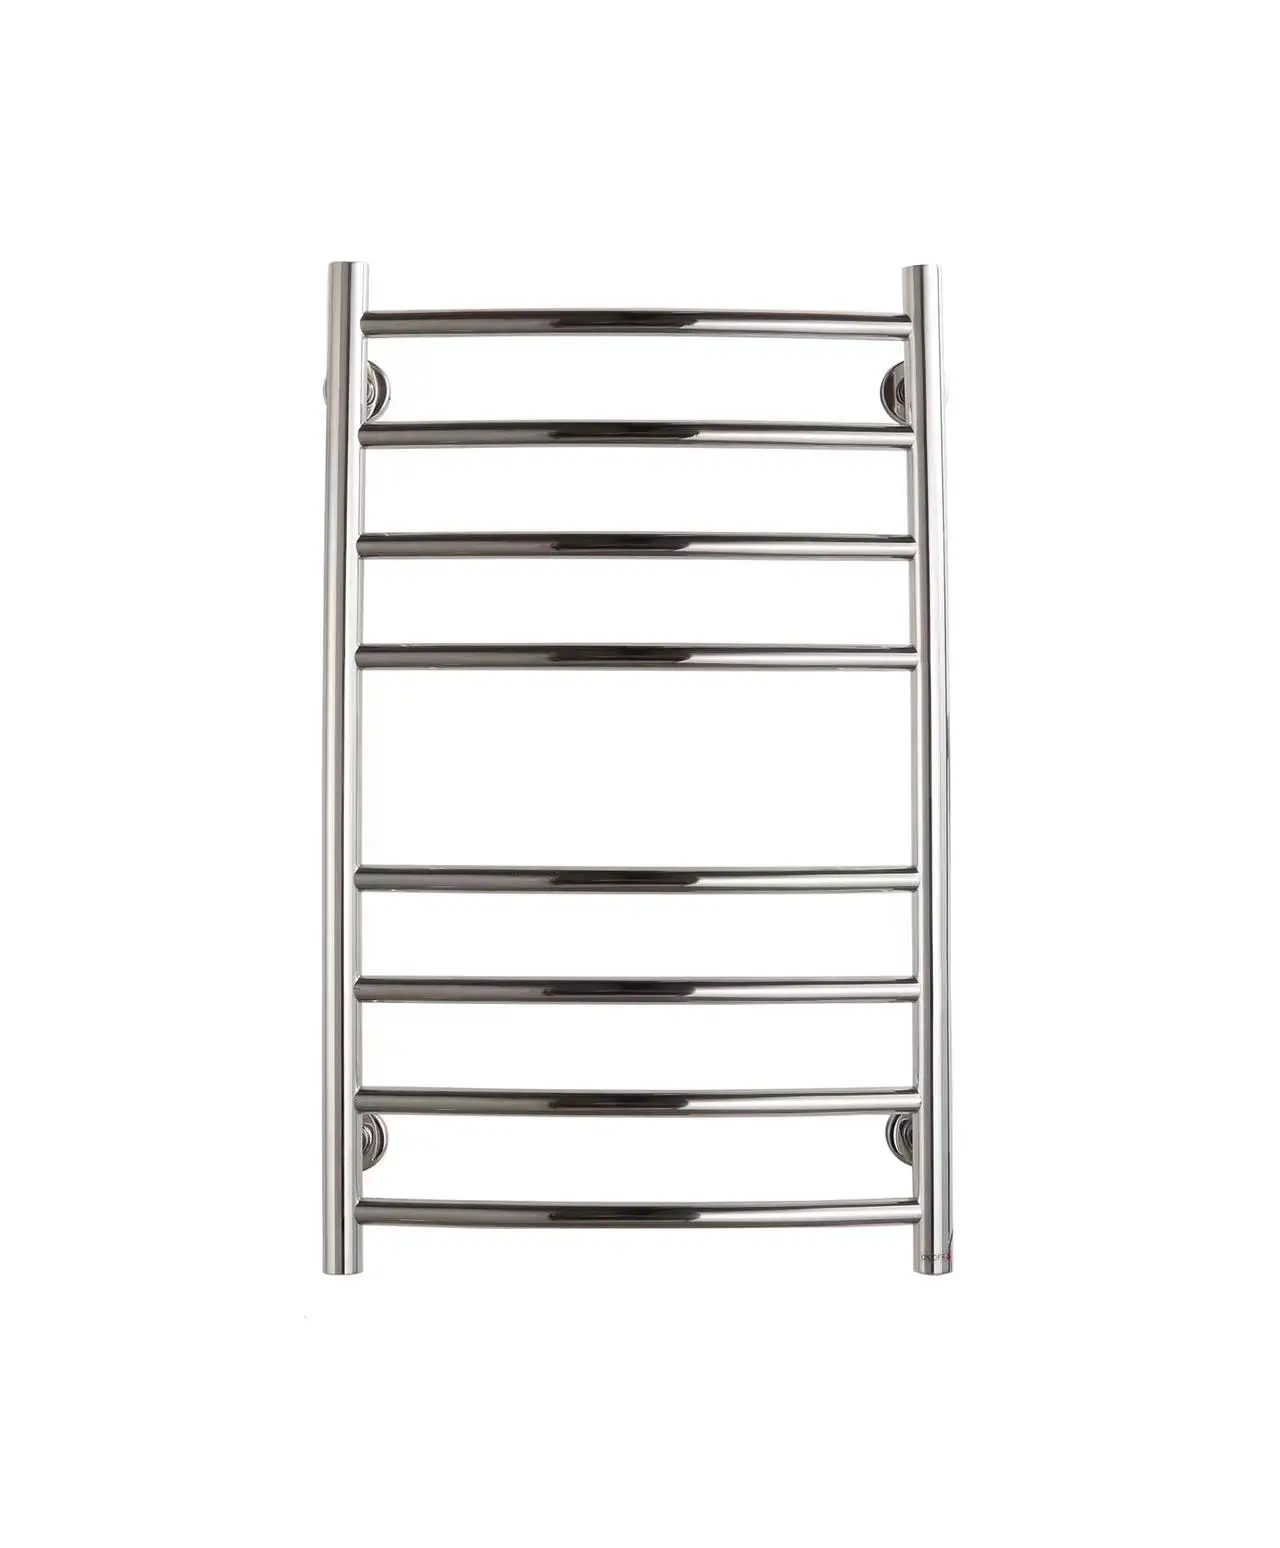 New Design Electric Heated Towel Rack With Temperature Control For Bathroom Stainless Steel Towel Warmer